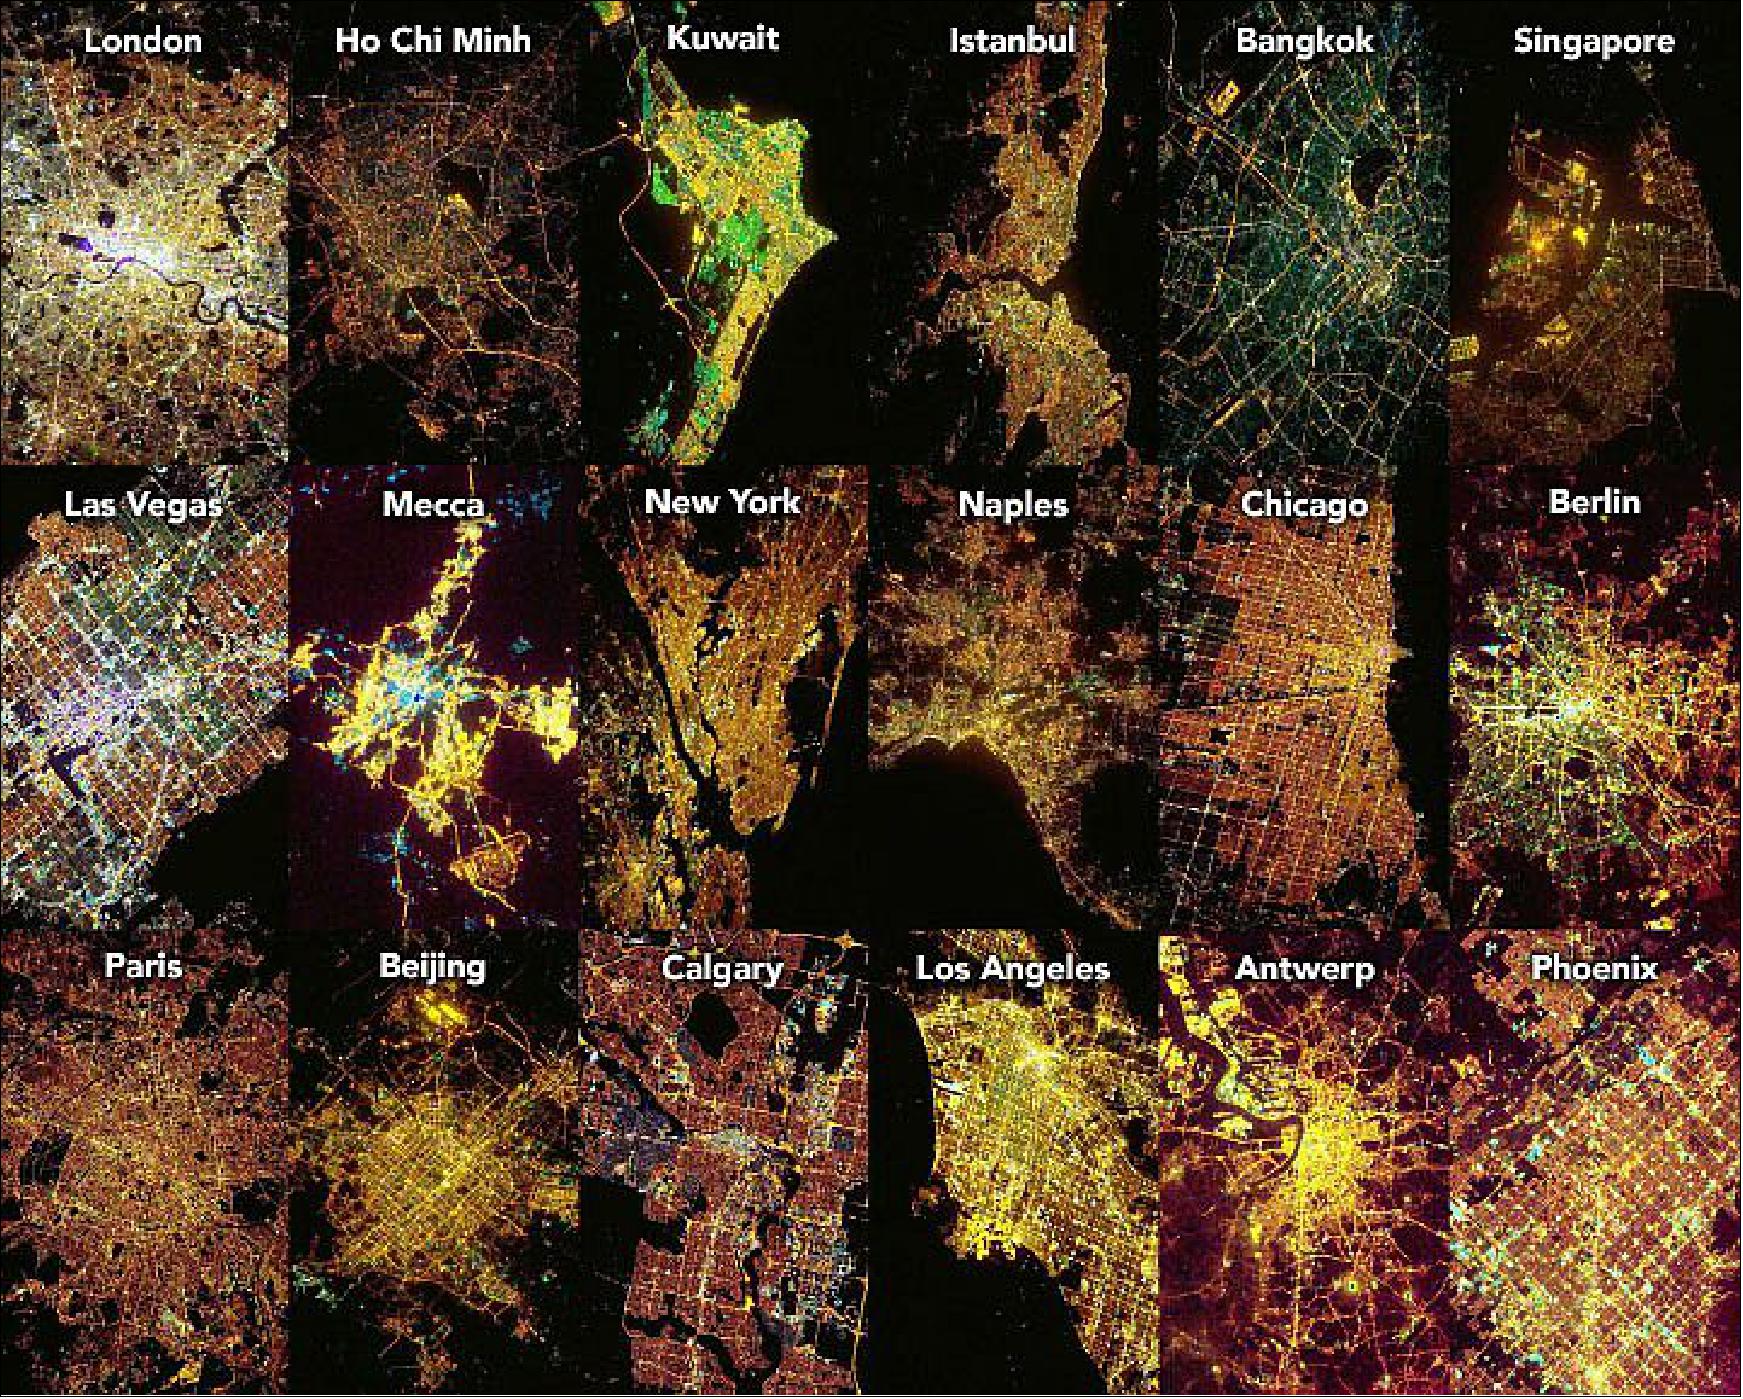 Figure 9: The montage shows 18 cities—from London to Singapore to Phoenix—with especially diverse nighttime lightscapes. The images are also relatively high in resolution: Each was shot with a 400 mm lens capable of resolving individual lights. Small then calibrated each of the images to have the same color temperature, so they could be compared directly. This montage was calibrated to 5500 Kelvin—about the same color temperature as sunlight (image credit: NASA Earth Observatory)